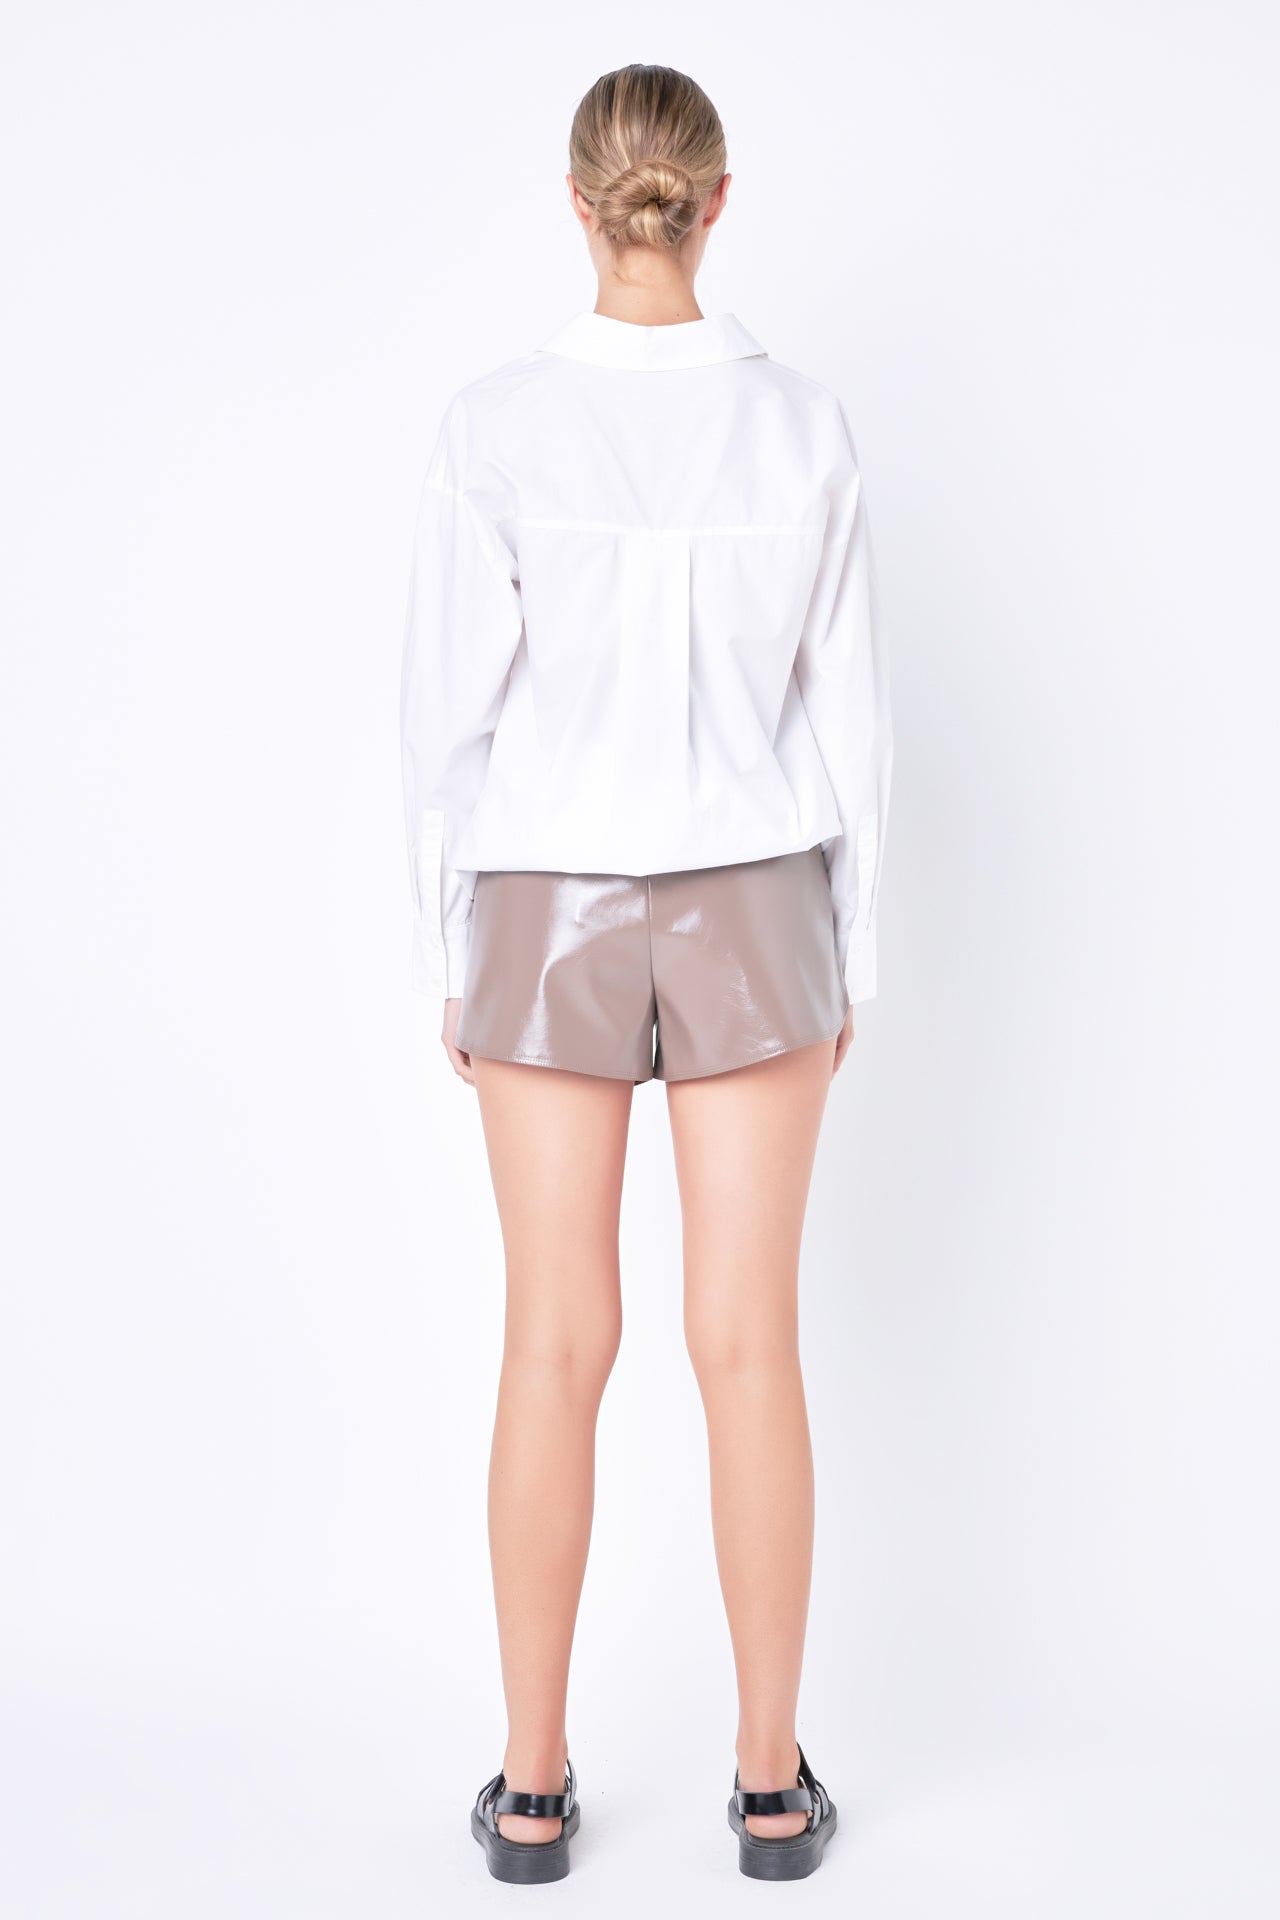 GREY LAB - Oversize Collared Shirt - TOPS available at Objectrare